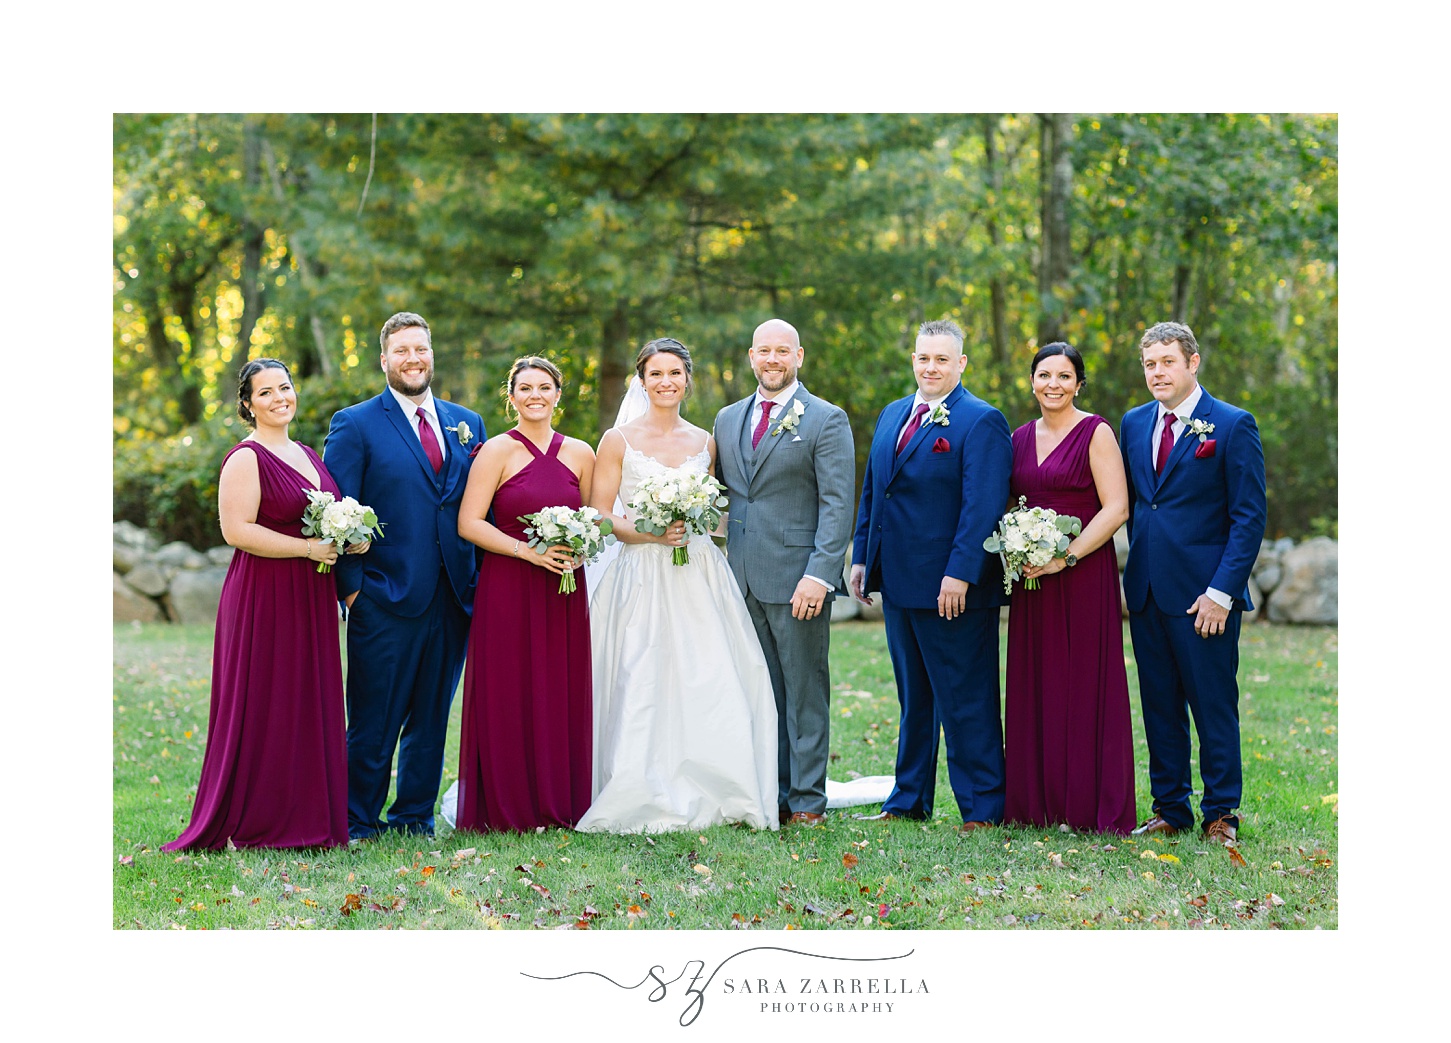 bride and groom pose with bridal party in burgundy gowns and navy suits